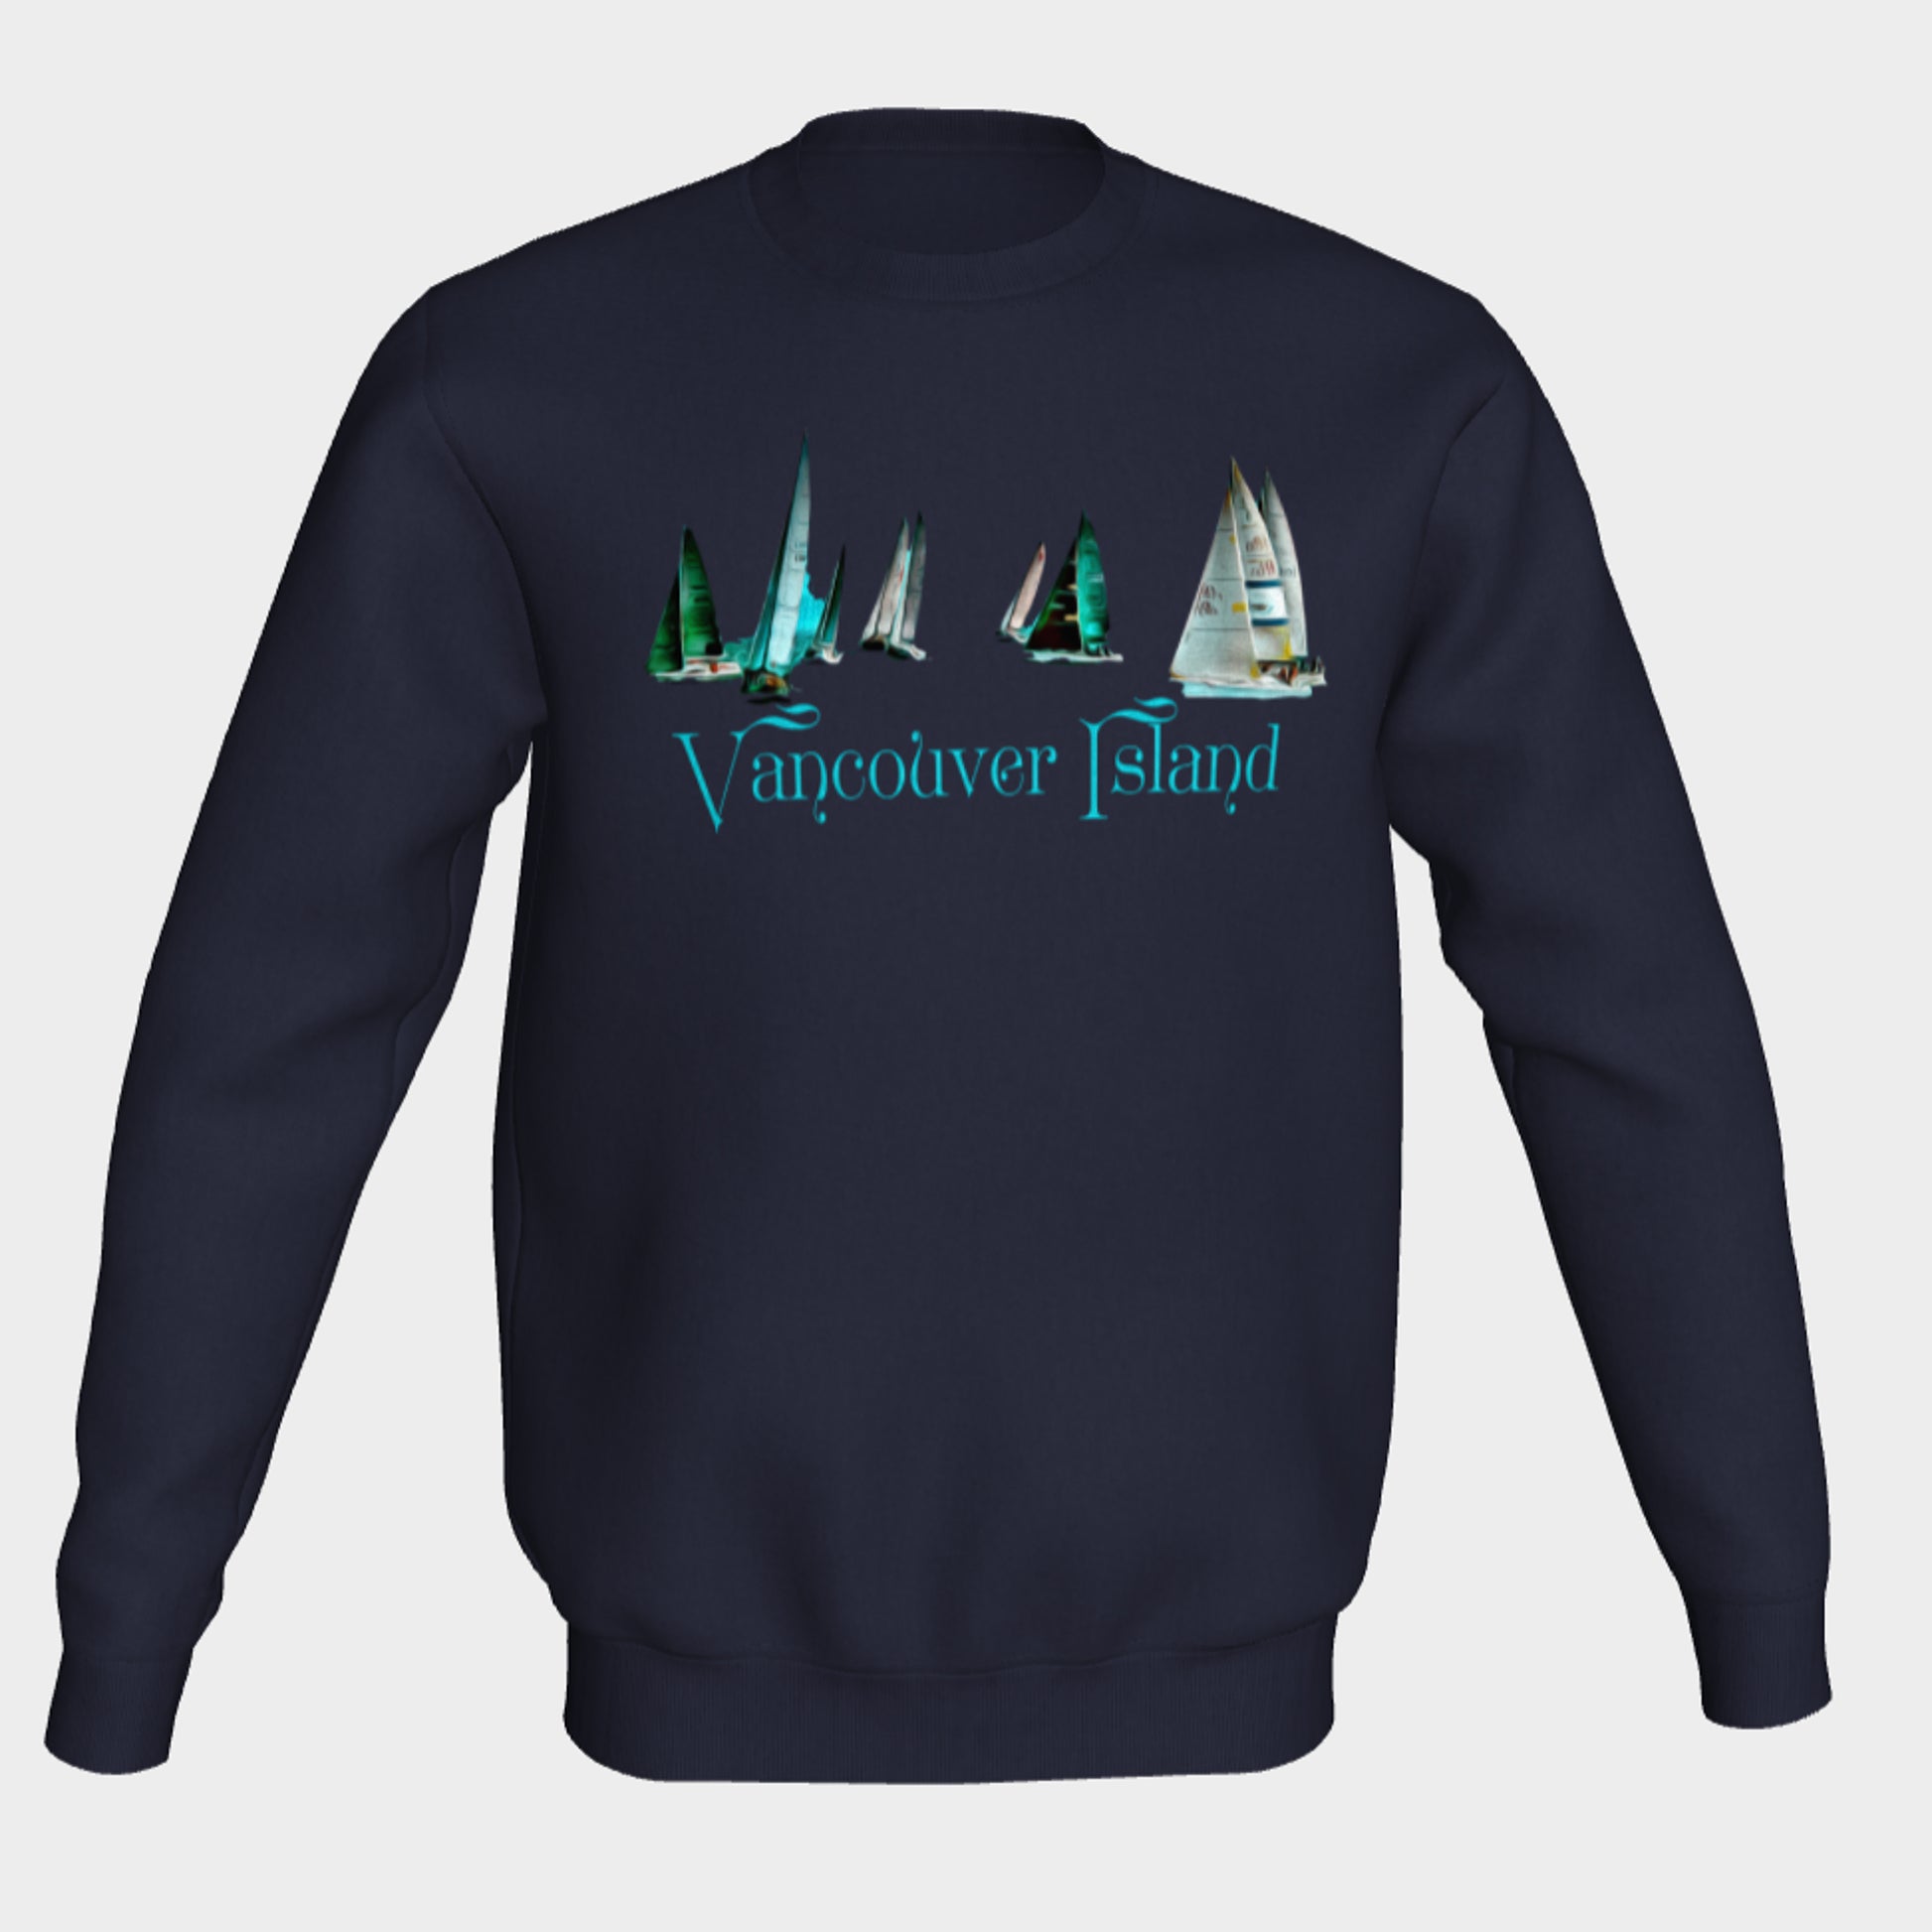 Sail Away Vancouver Island Crewneck Sweatshirt What’s better than a super cozy sweatshirt? A super cozy sweatshirt from Van Isle Goddess!  Super cozy unisex sweatshirt for those chilly days.  Excellent for men or women.   Fit is roomy and comfortable. 